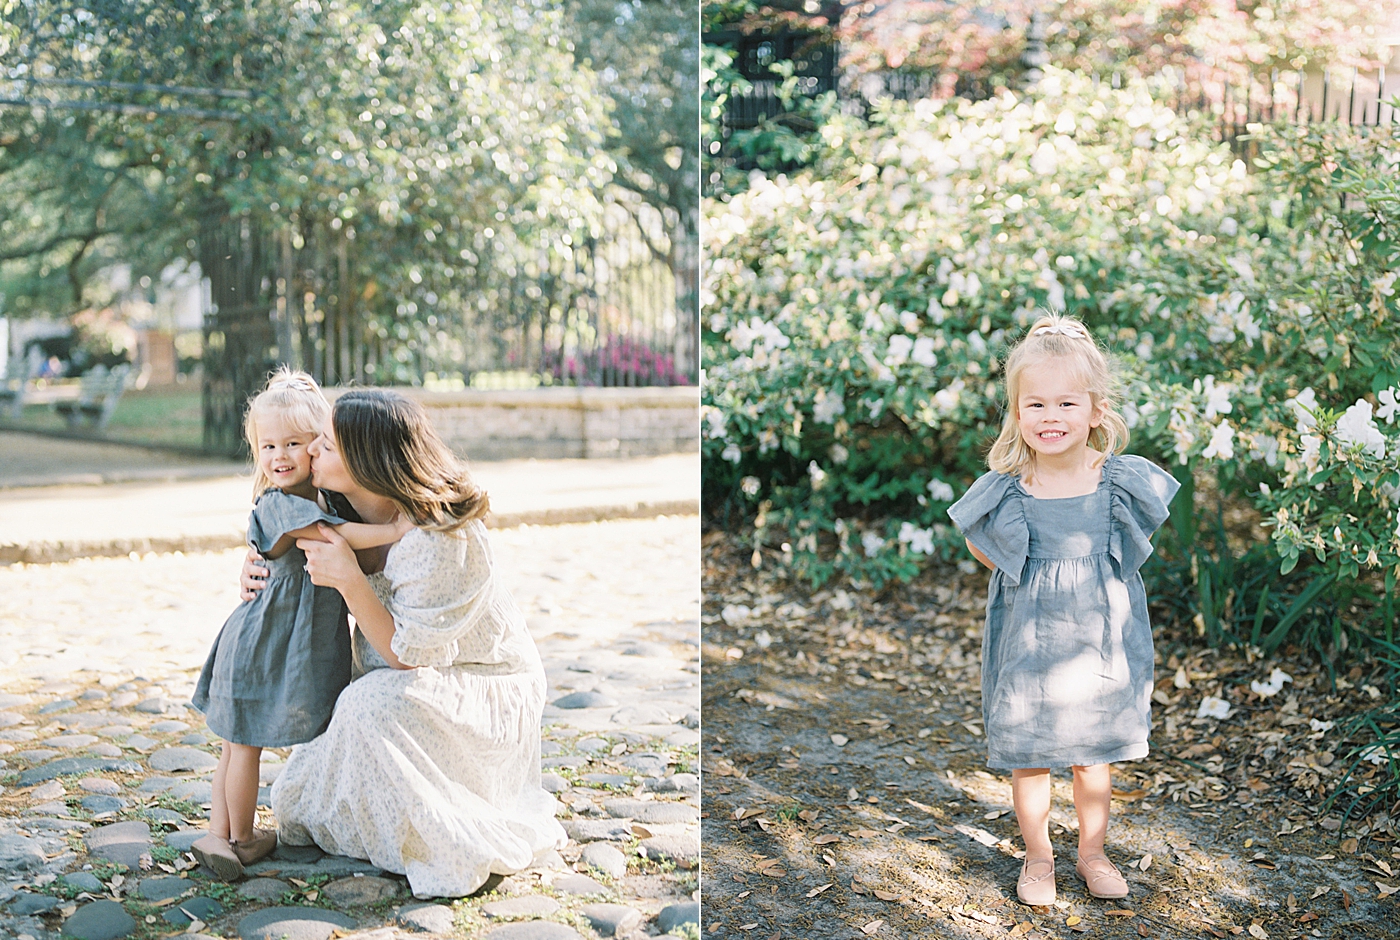 Side-by-side image of an expecting mother kneeling down beside her daughter on a cobblestone street and  another image of a to-be big sister | Image by Caitlyn Motycka